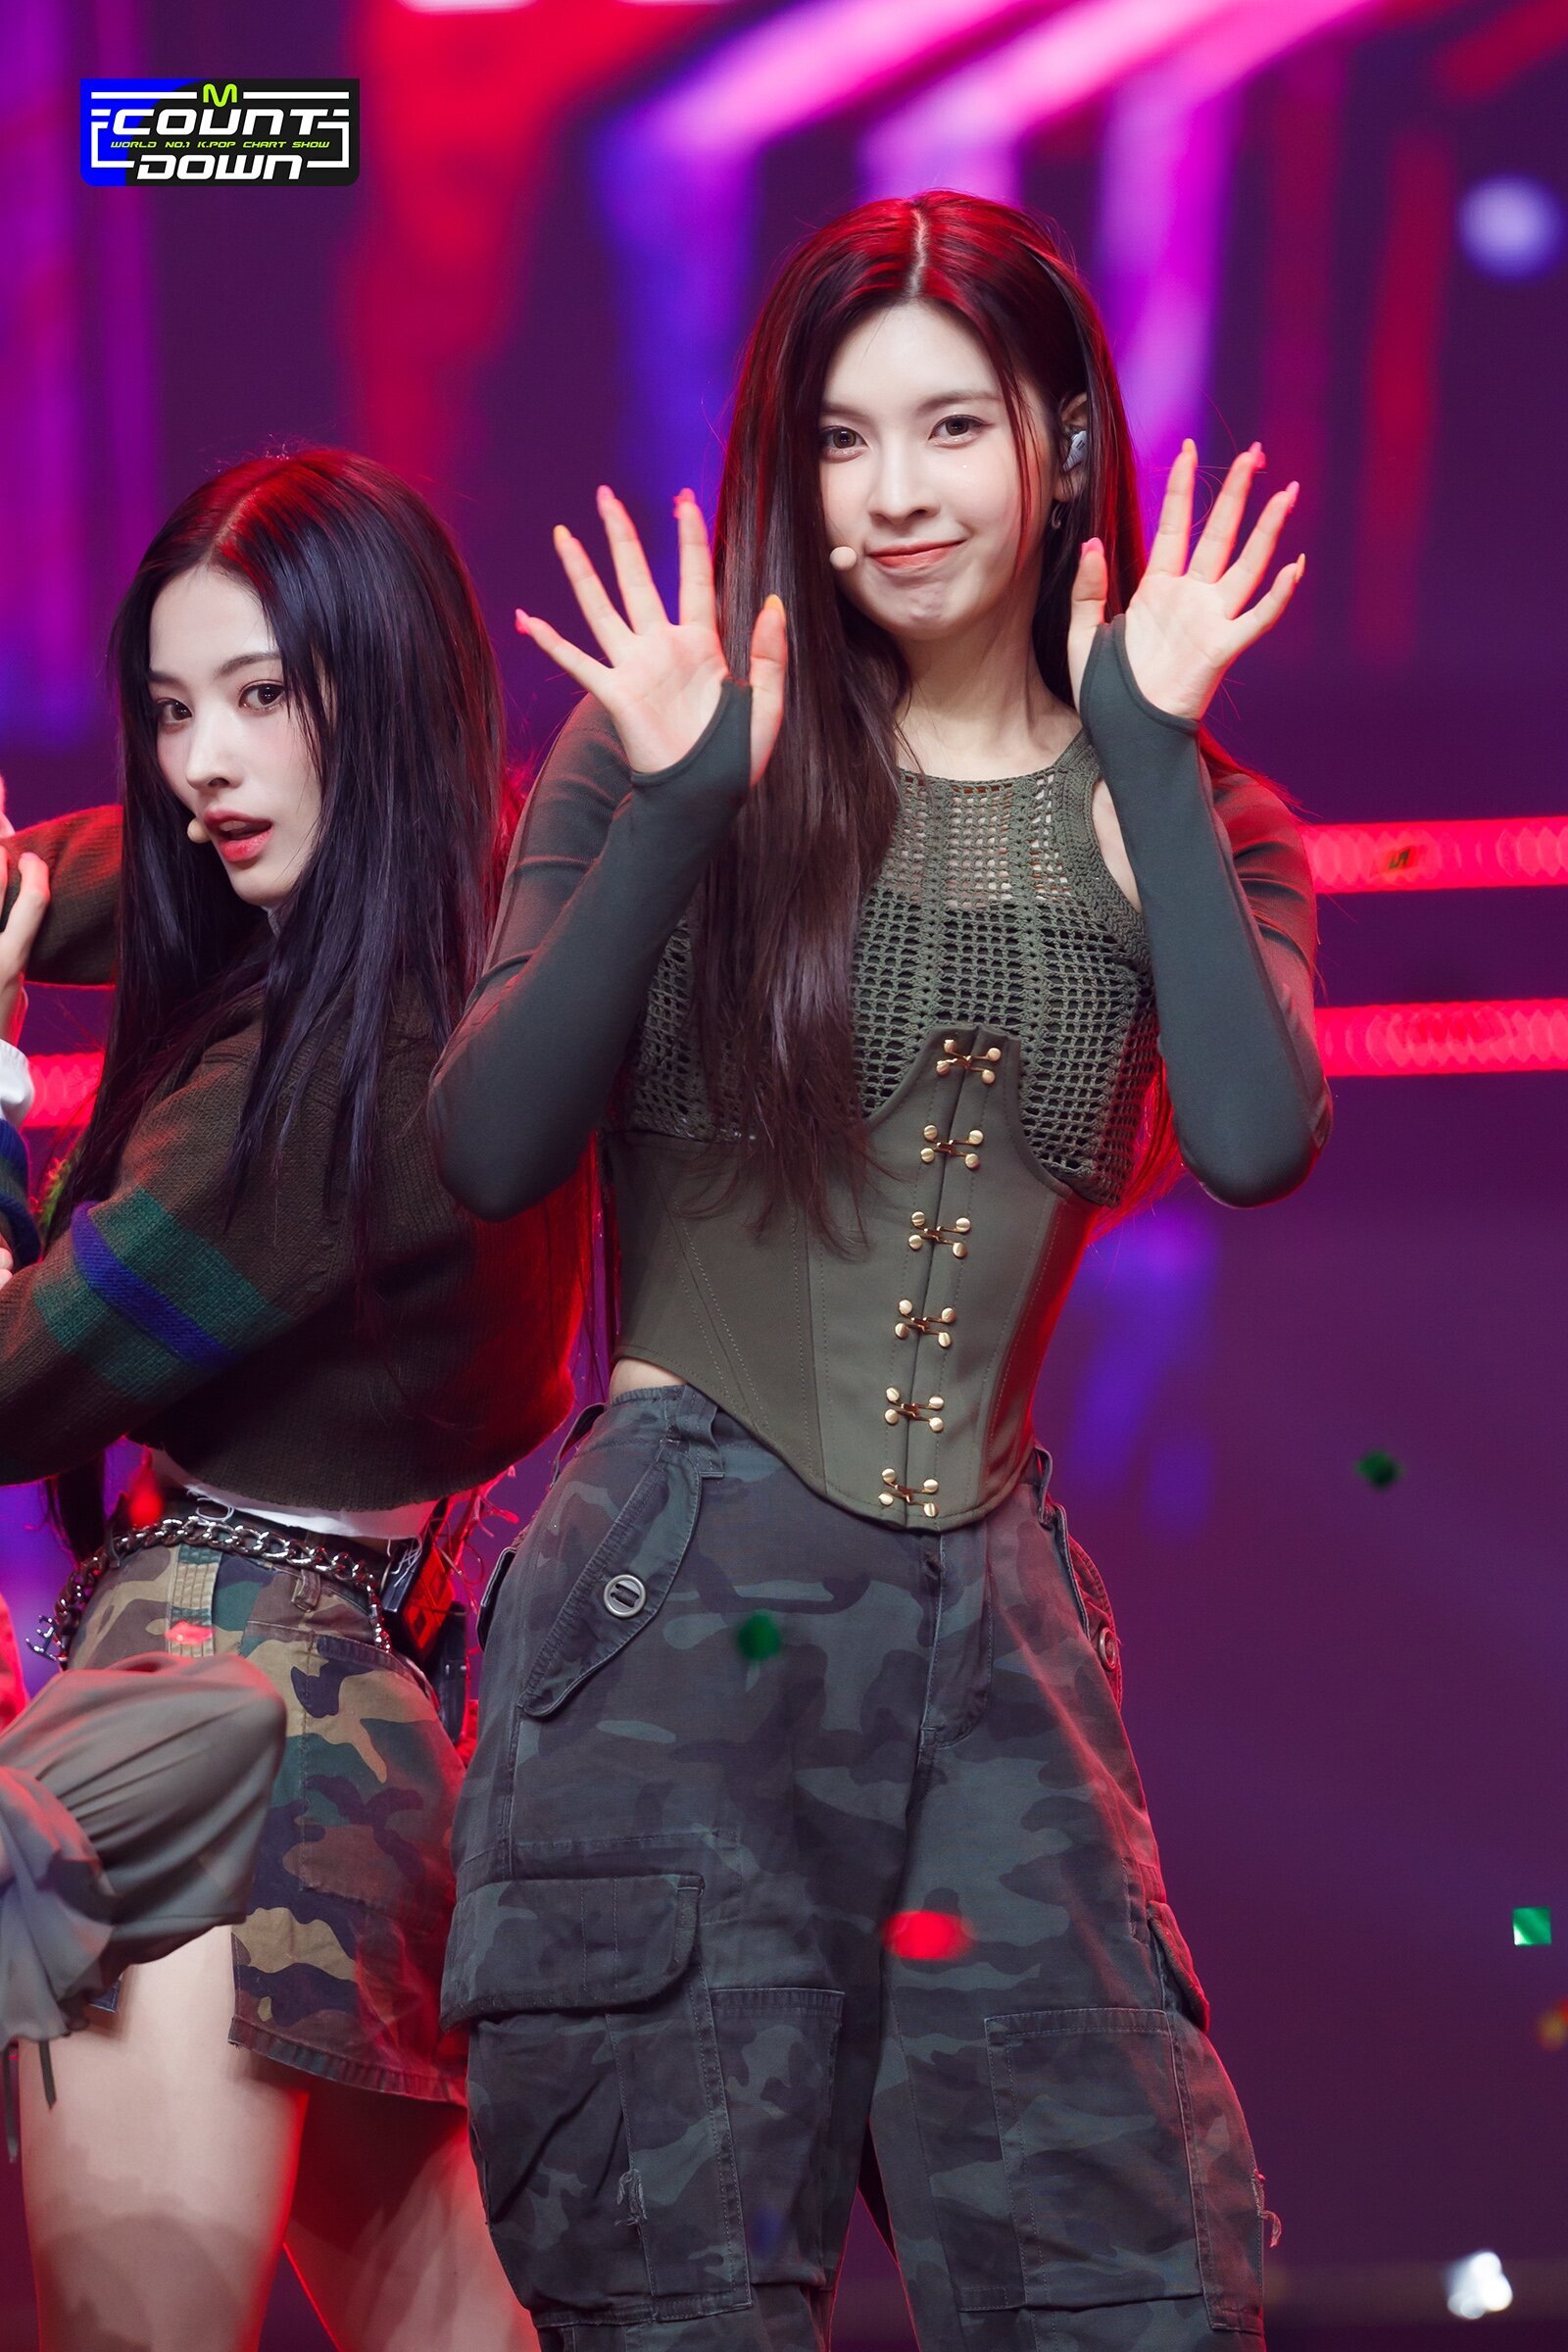 220922 M Countdown] Nmixx Bae - Dice  Kpop outfits, Stage outfits, Size 12  fashion